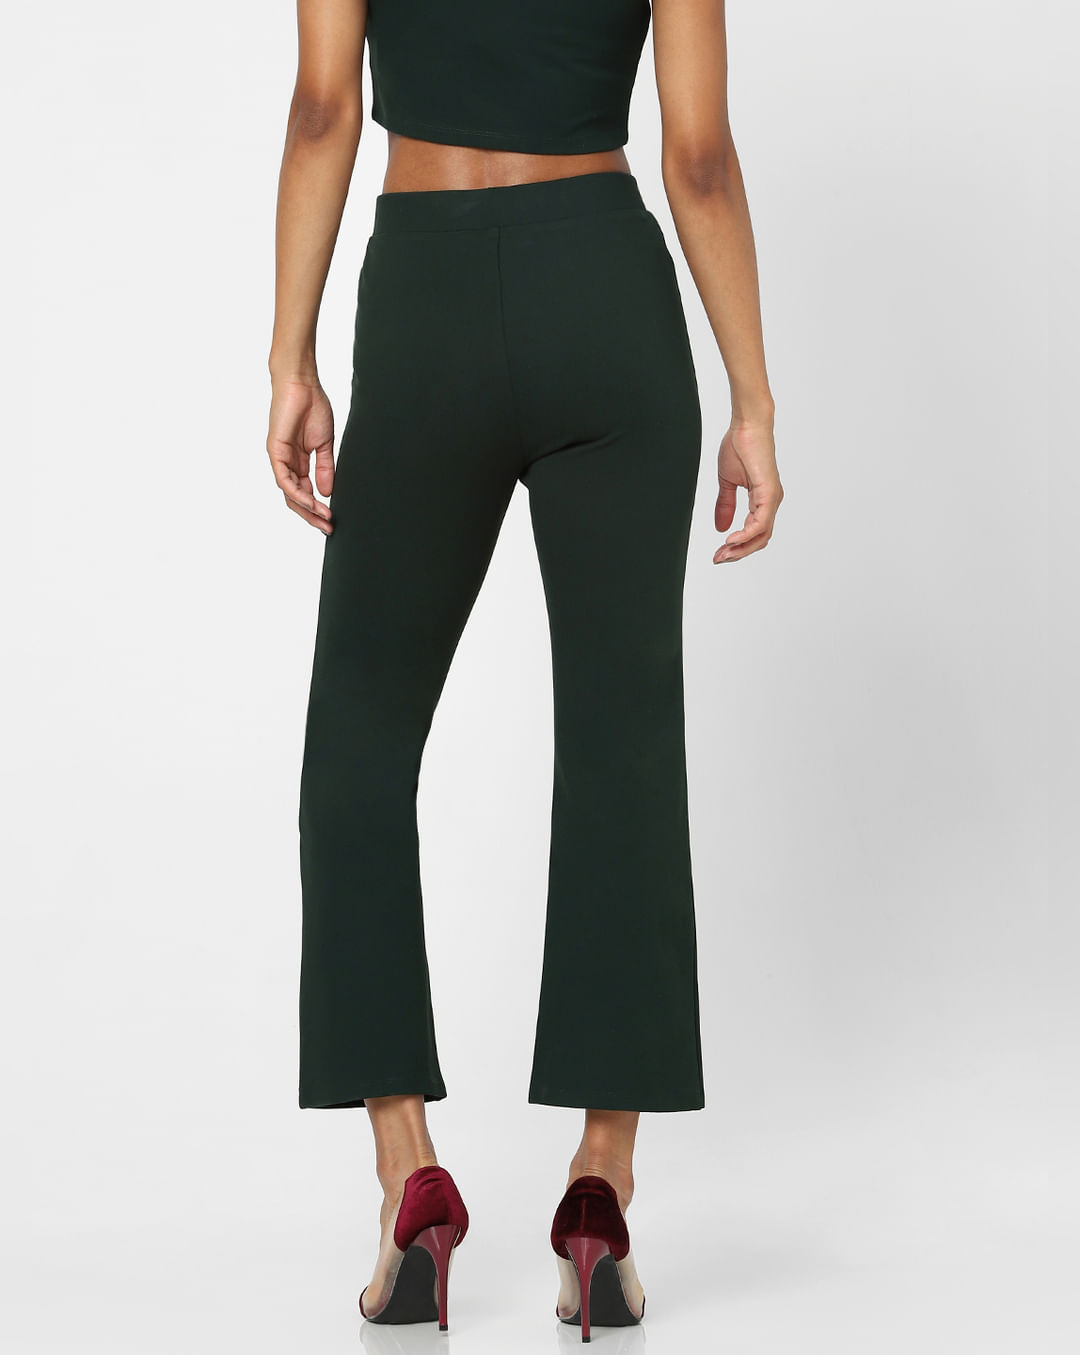 Green Flared Co-ord Pants